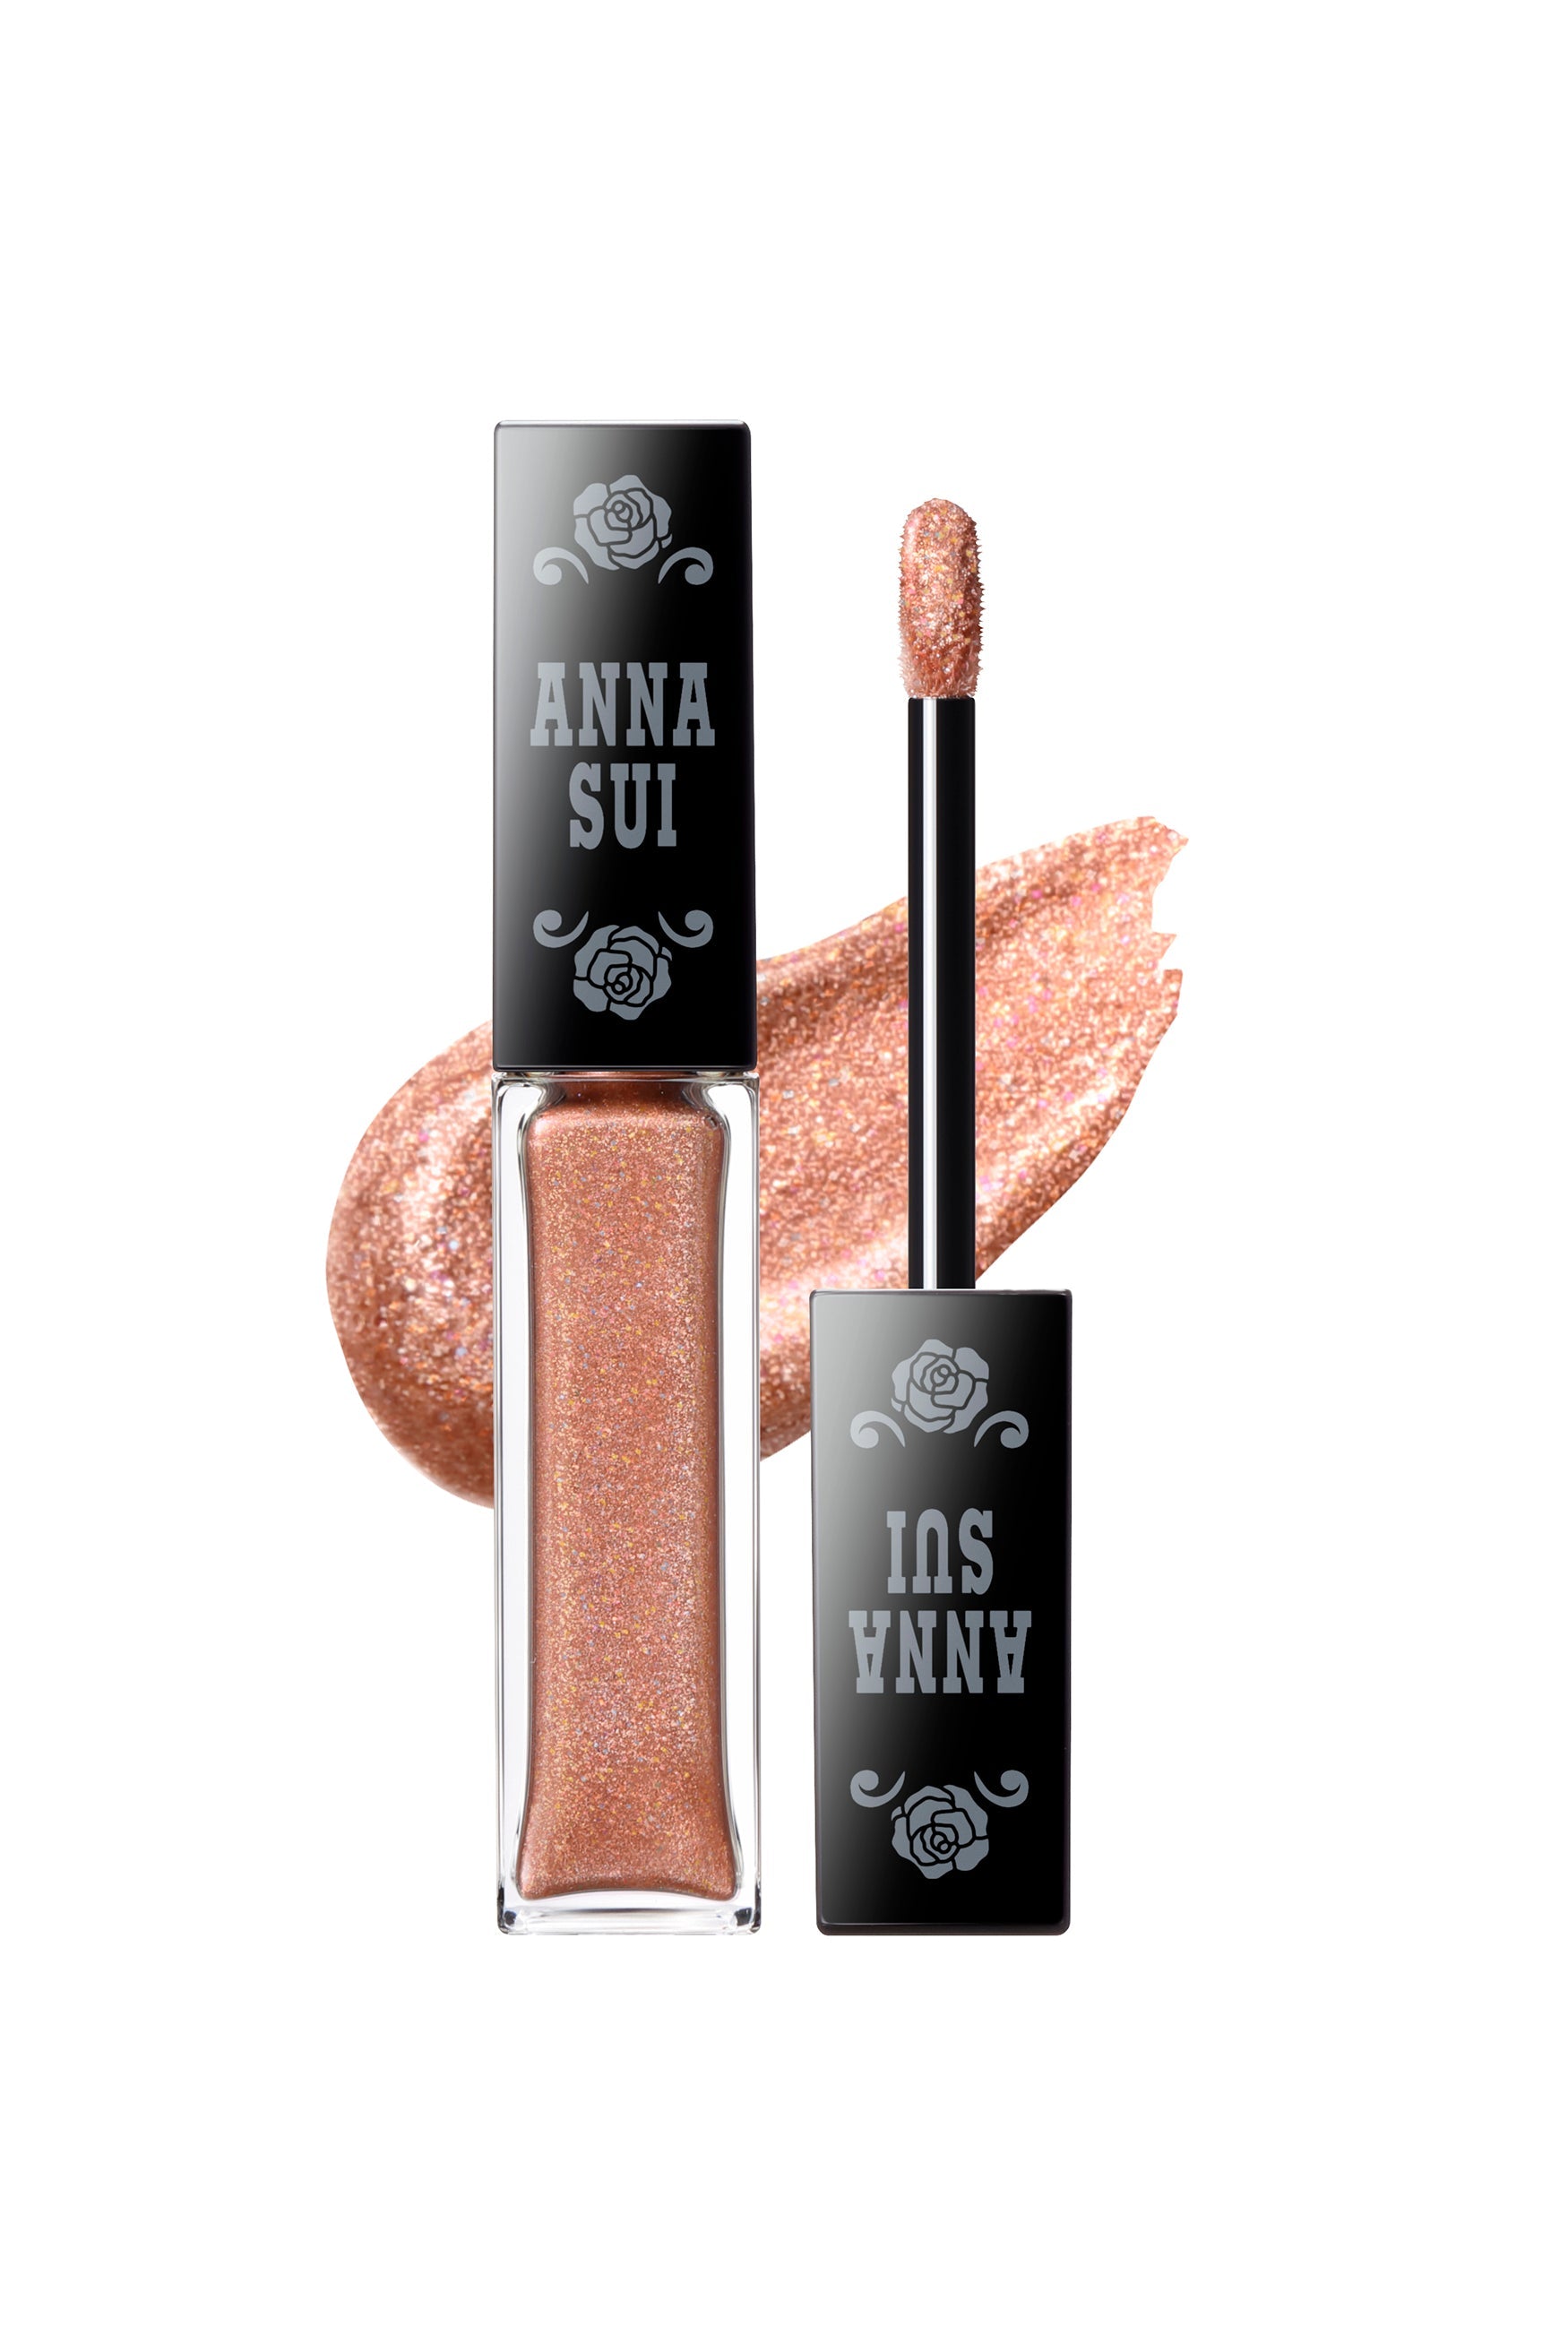 HONEY GLOW, transparent bottle & applicator with Anna Sui label on the black top.